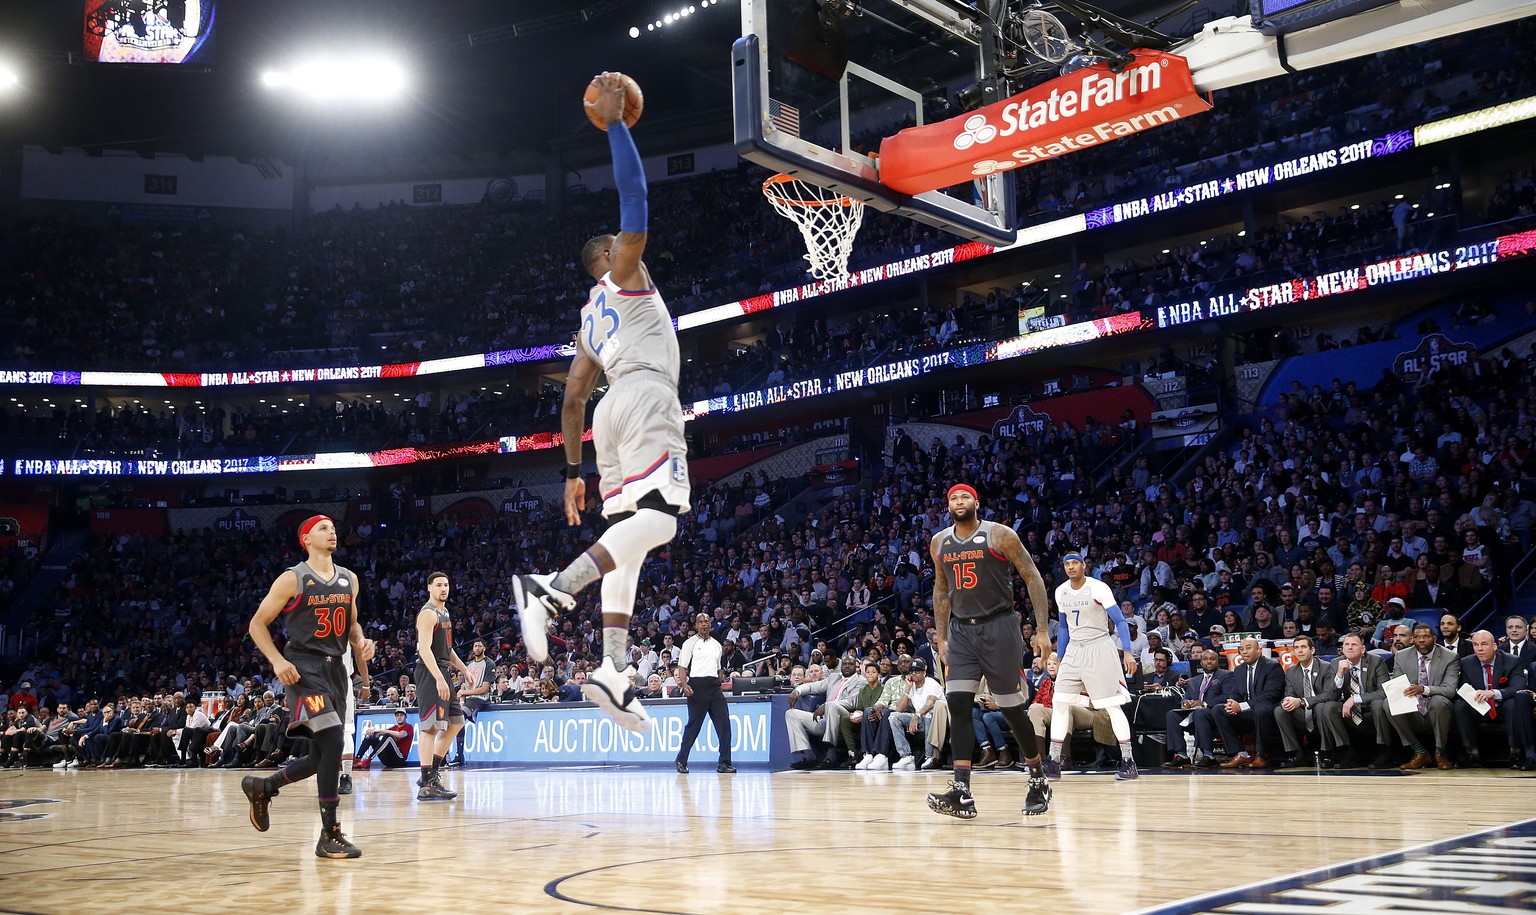 Eastern Conference LeBron James of the Cleveland Caveliers (23) slam dunks during the first half of the NBA All-Star basketball game in New Orleans, Sunday, Feb. 19, 2017. (AP Photo/Gerald Herbert)